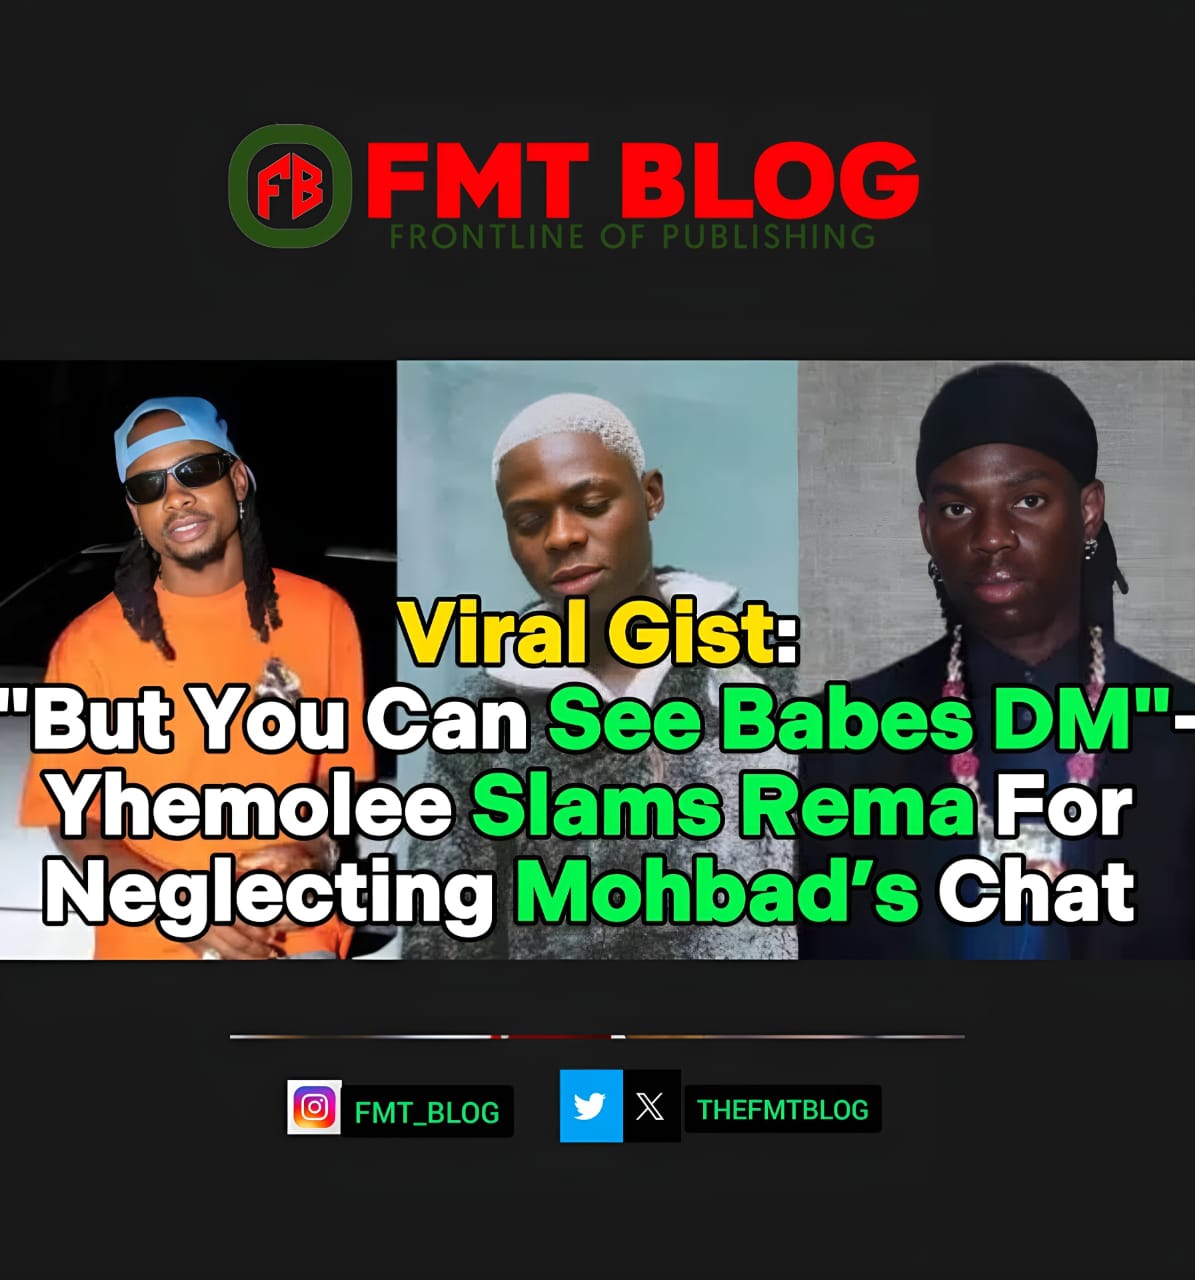 Mohbad: ”But You Can See Babes DM”- Yhemolee Slams Rema For Neglecting Mohbad’s Chat